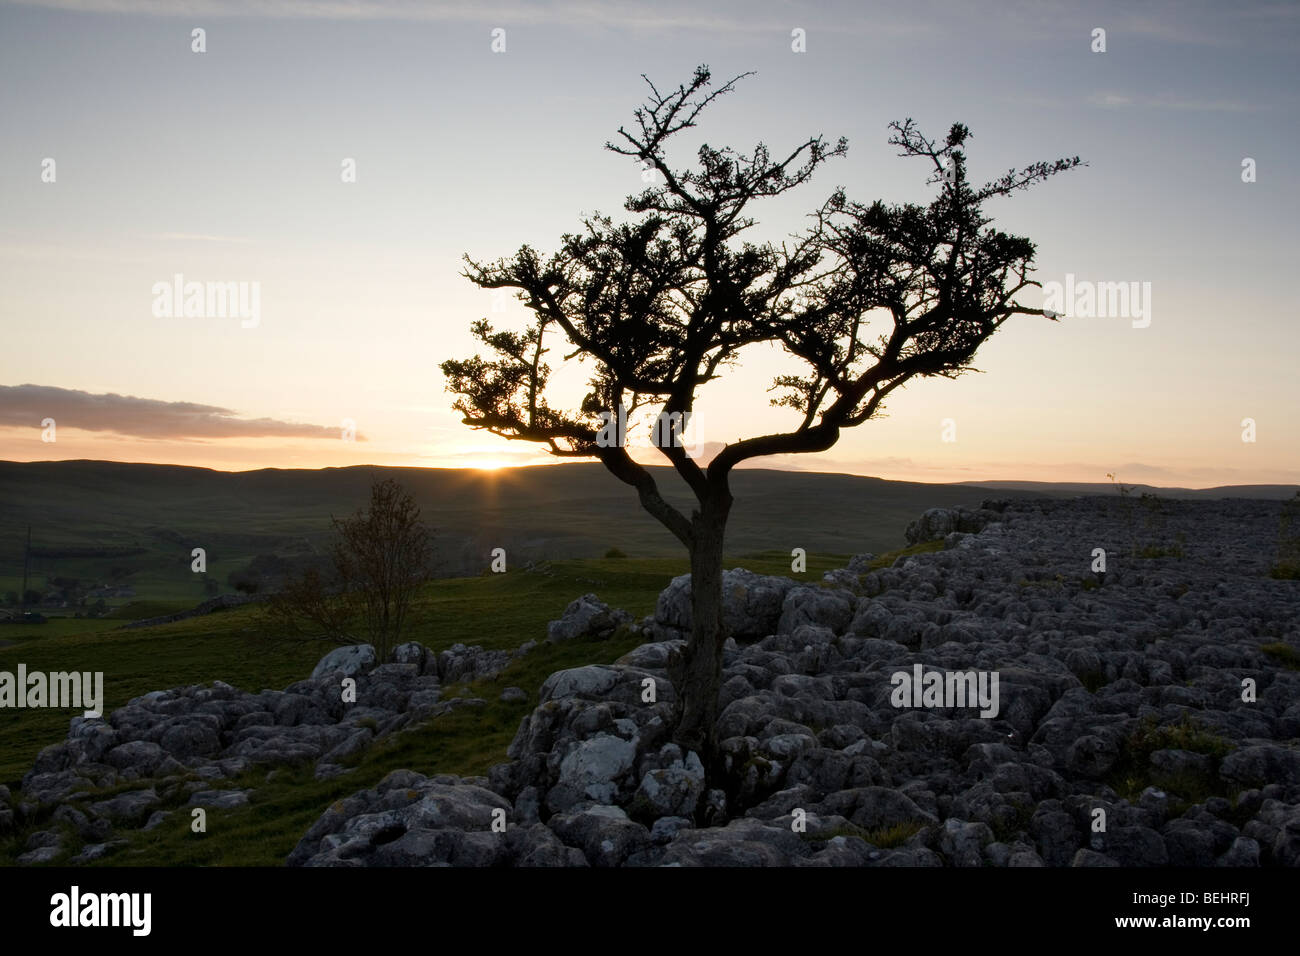 Limestone pavement near Conistone, Upper Wharfedale, in the Yorkshire Dales National Park, England Stock Photo